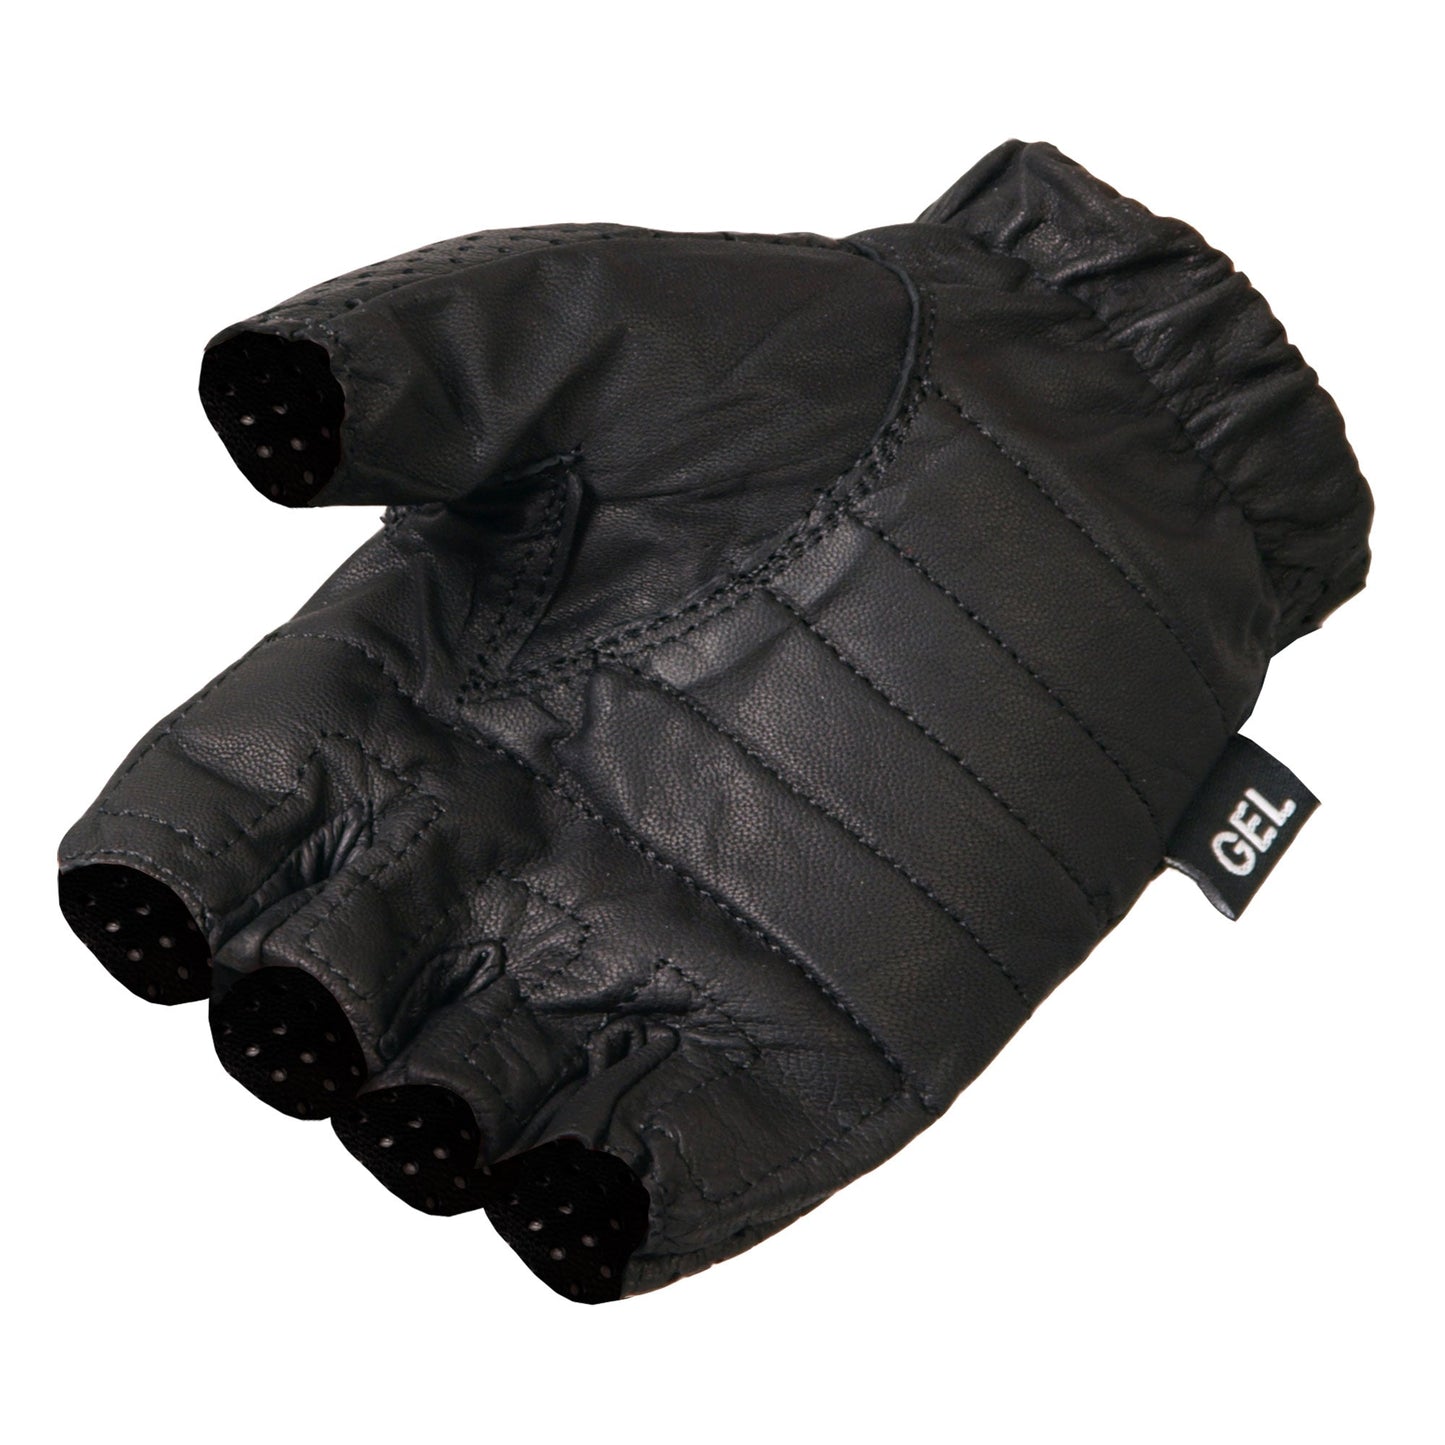 Unlined Fingerless Vented Leather Gloves with Padded Gel Palm